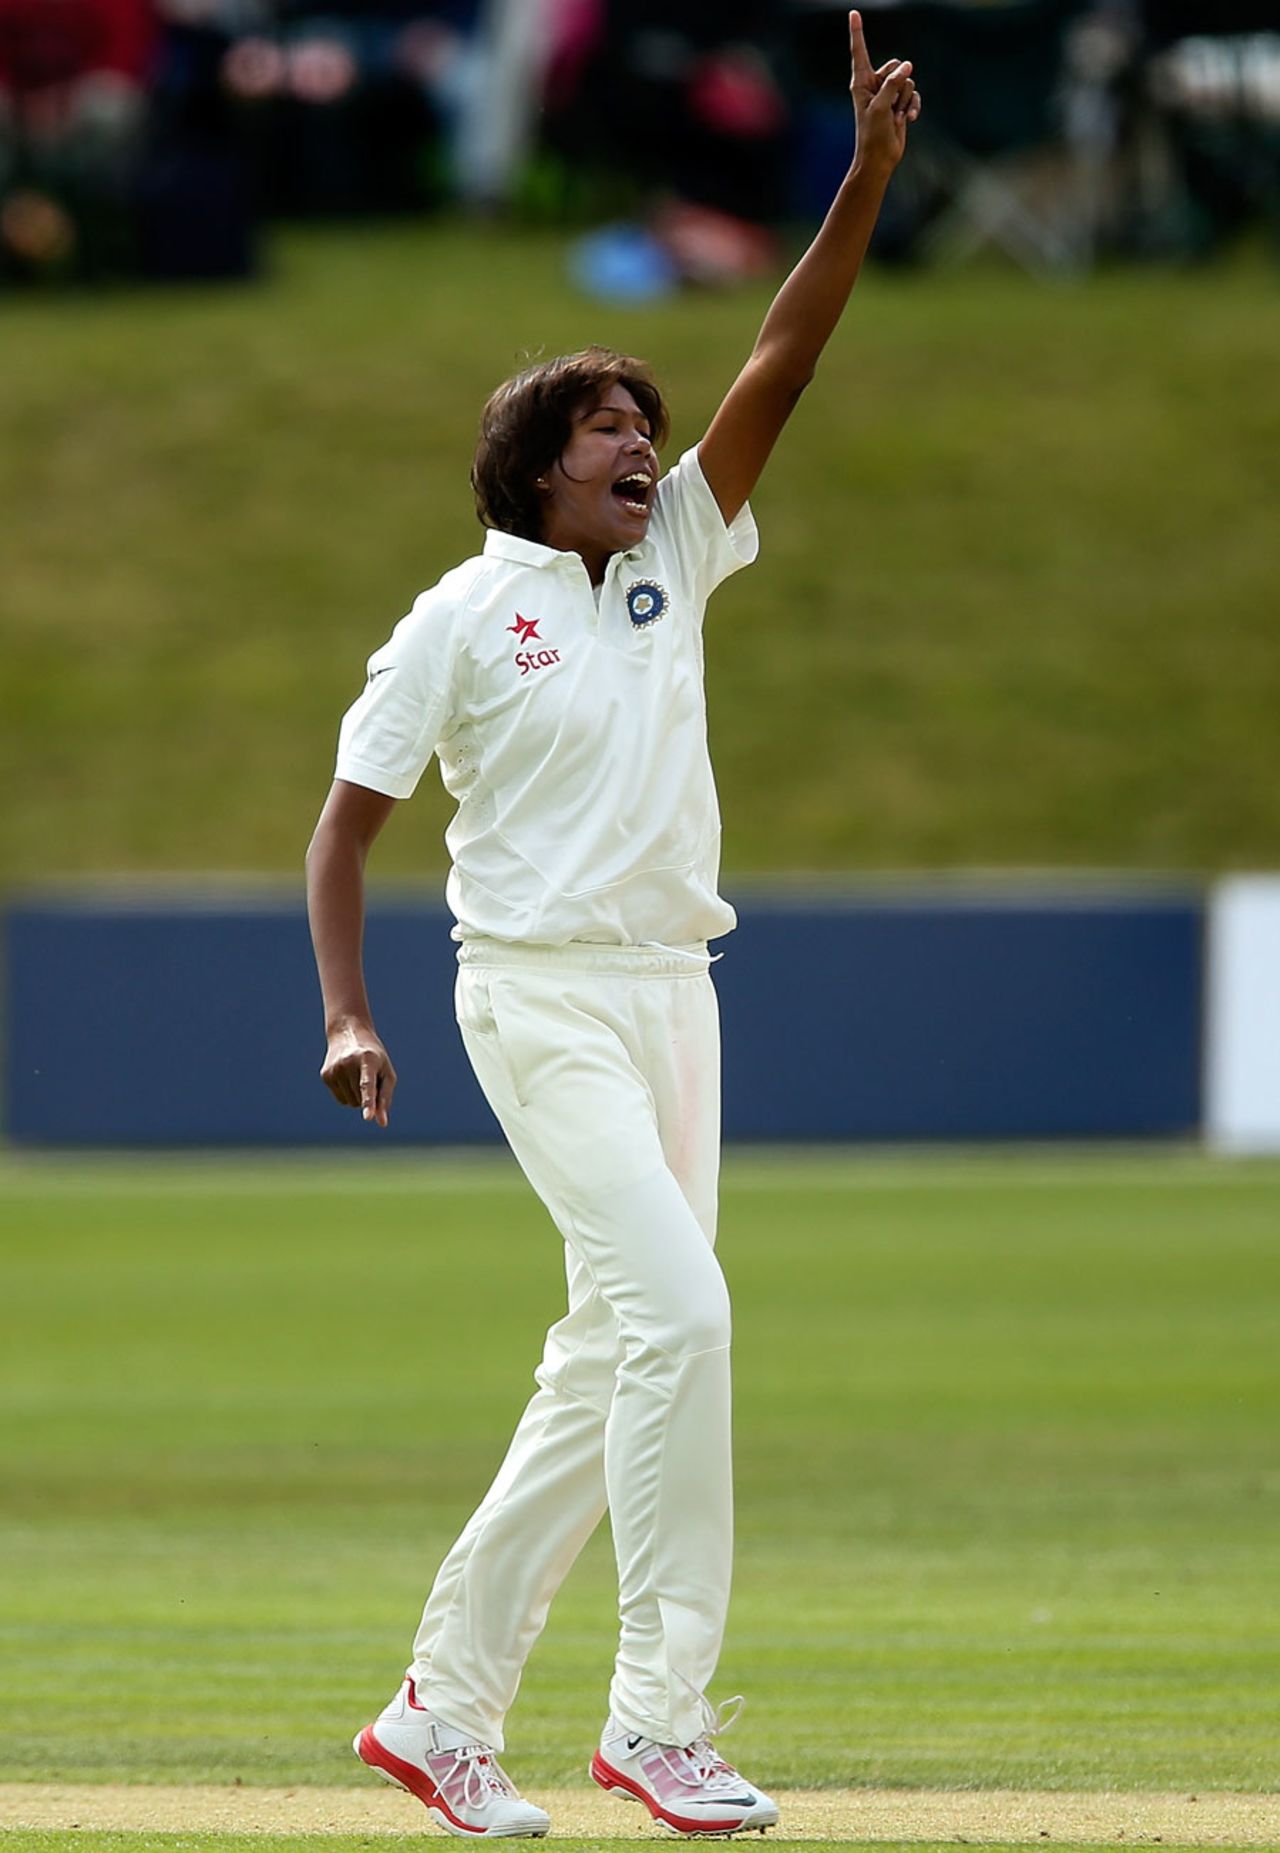 Jhulan Goswami finished with 4 for 48, England v India, only women's Test, Wormsley, 3rd day, August 15, 2014